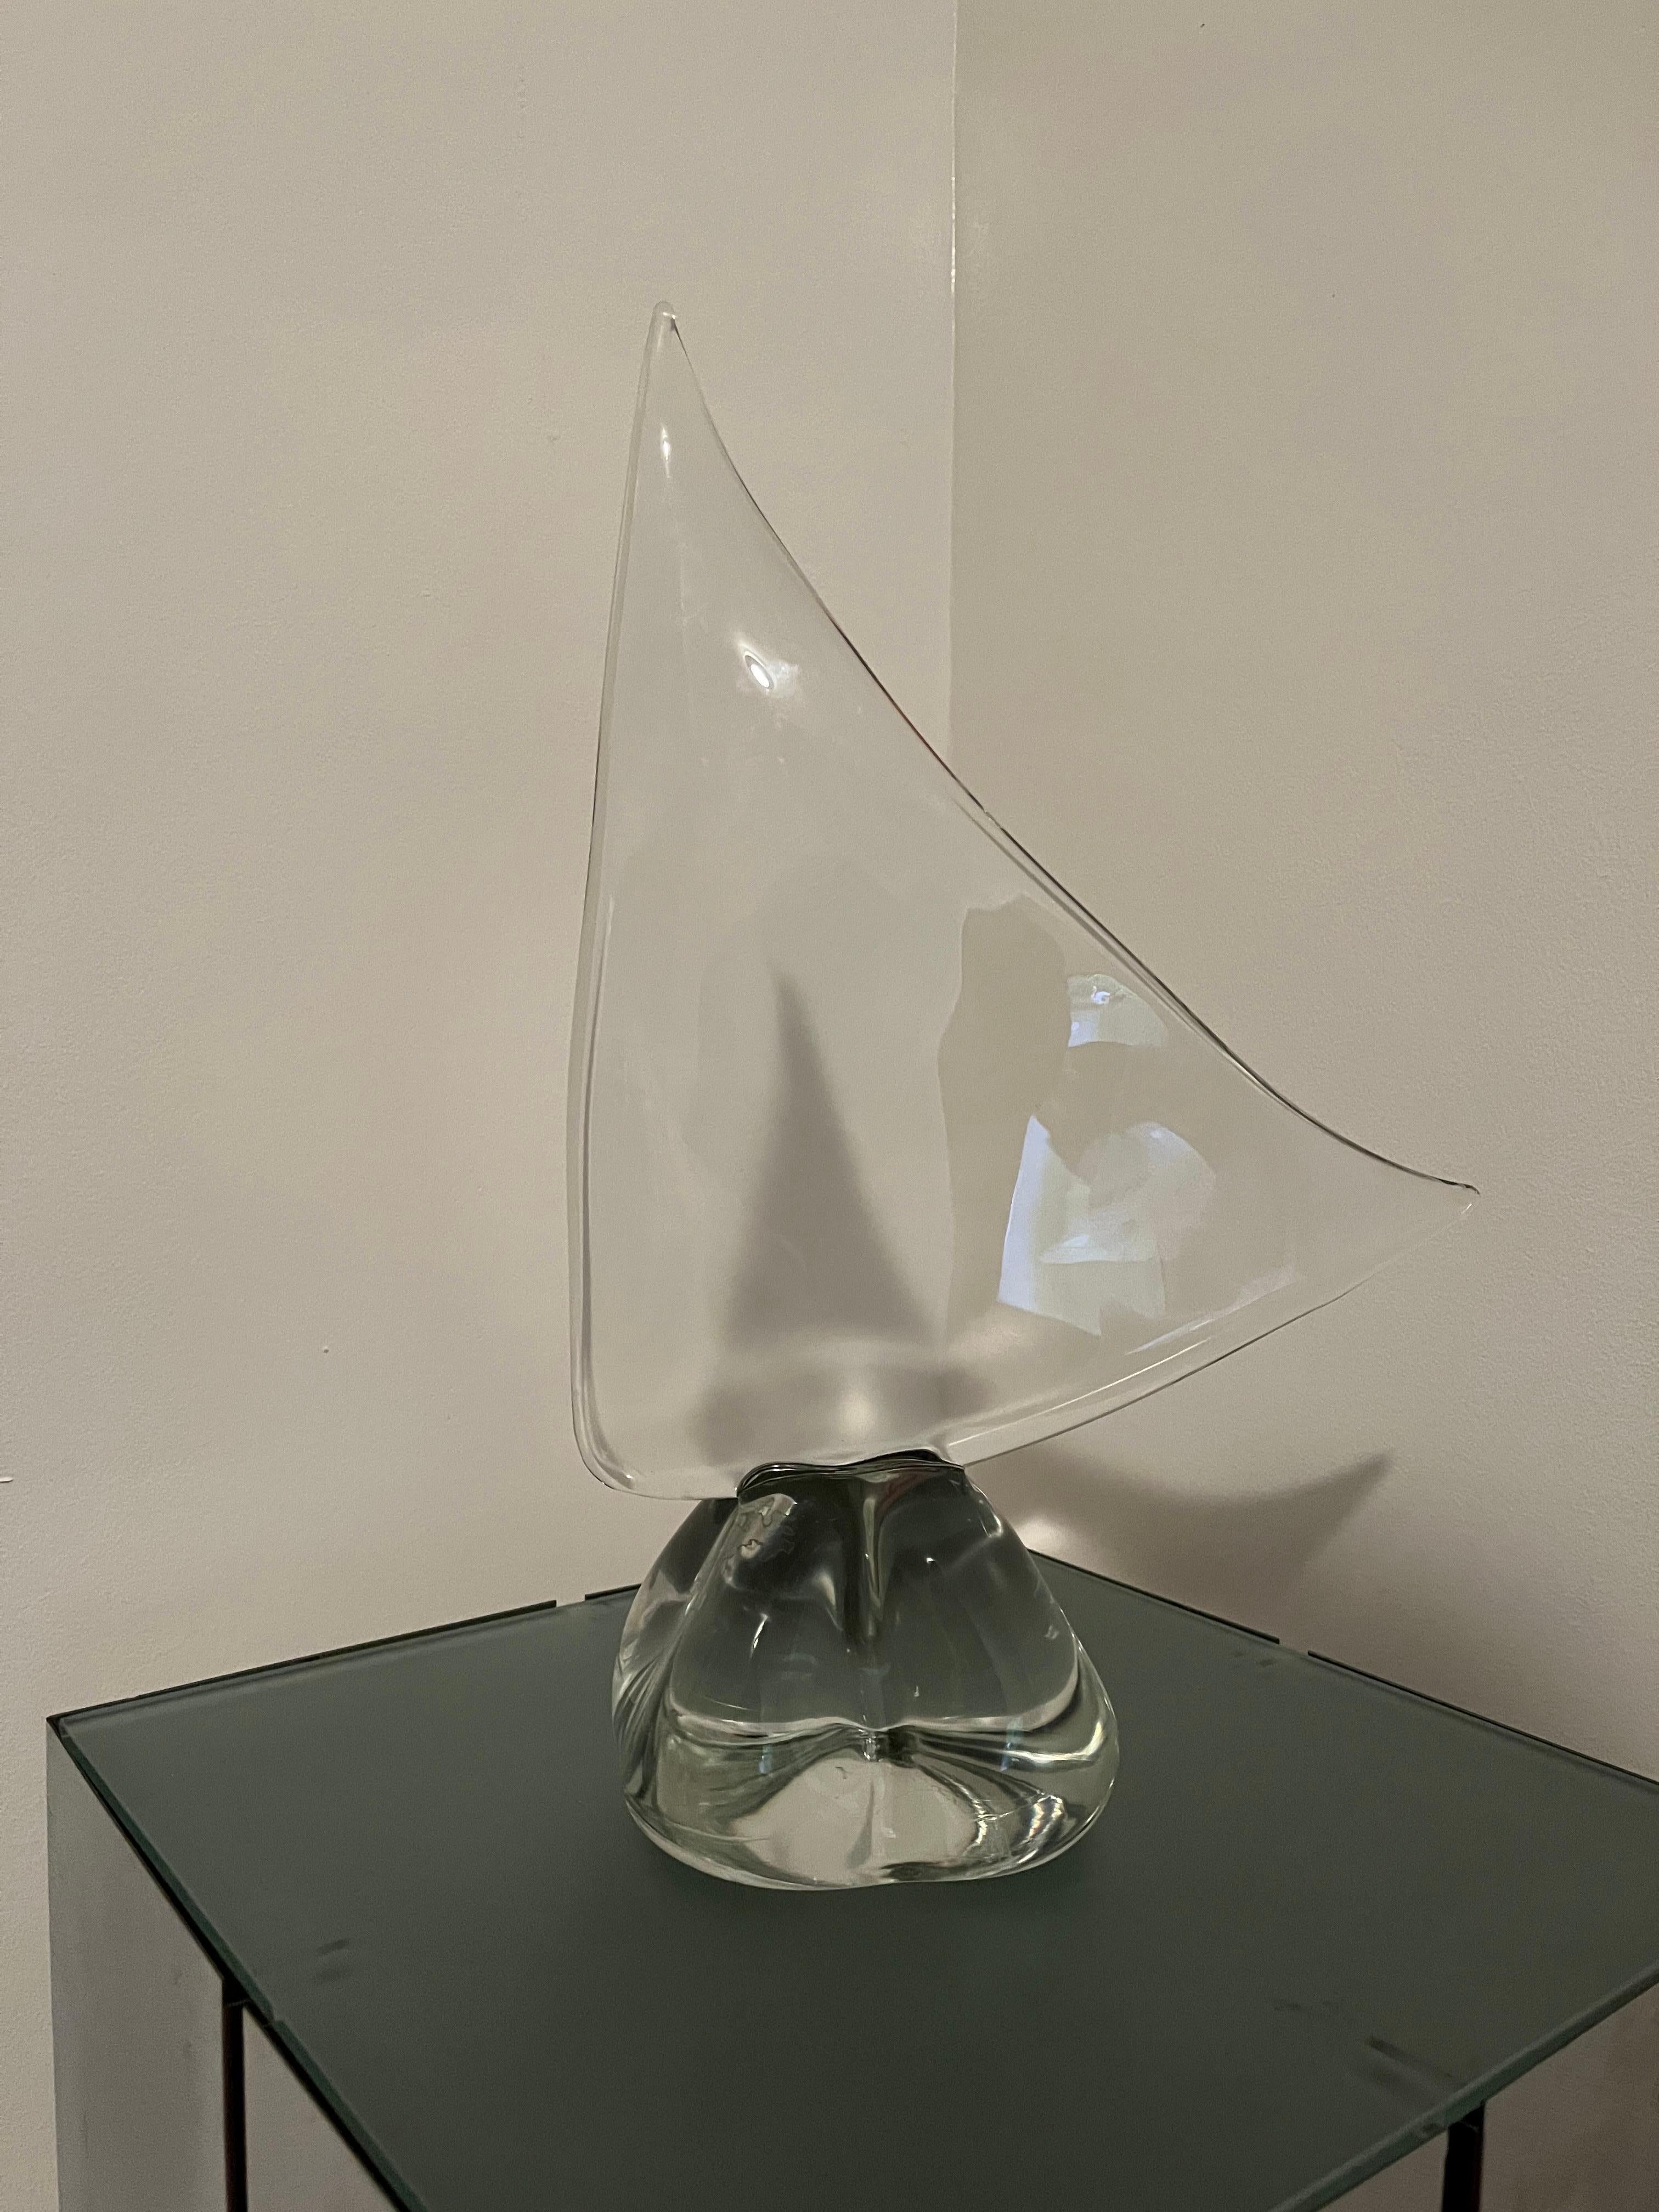 Large crystal sailboat sculpture in the manner of Daum, France, circa 1970s. Etched signature on bottom. Excellent condition. No chips or scratches.